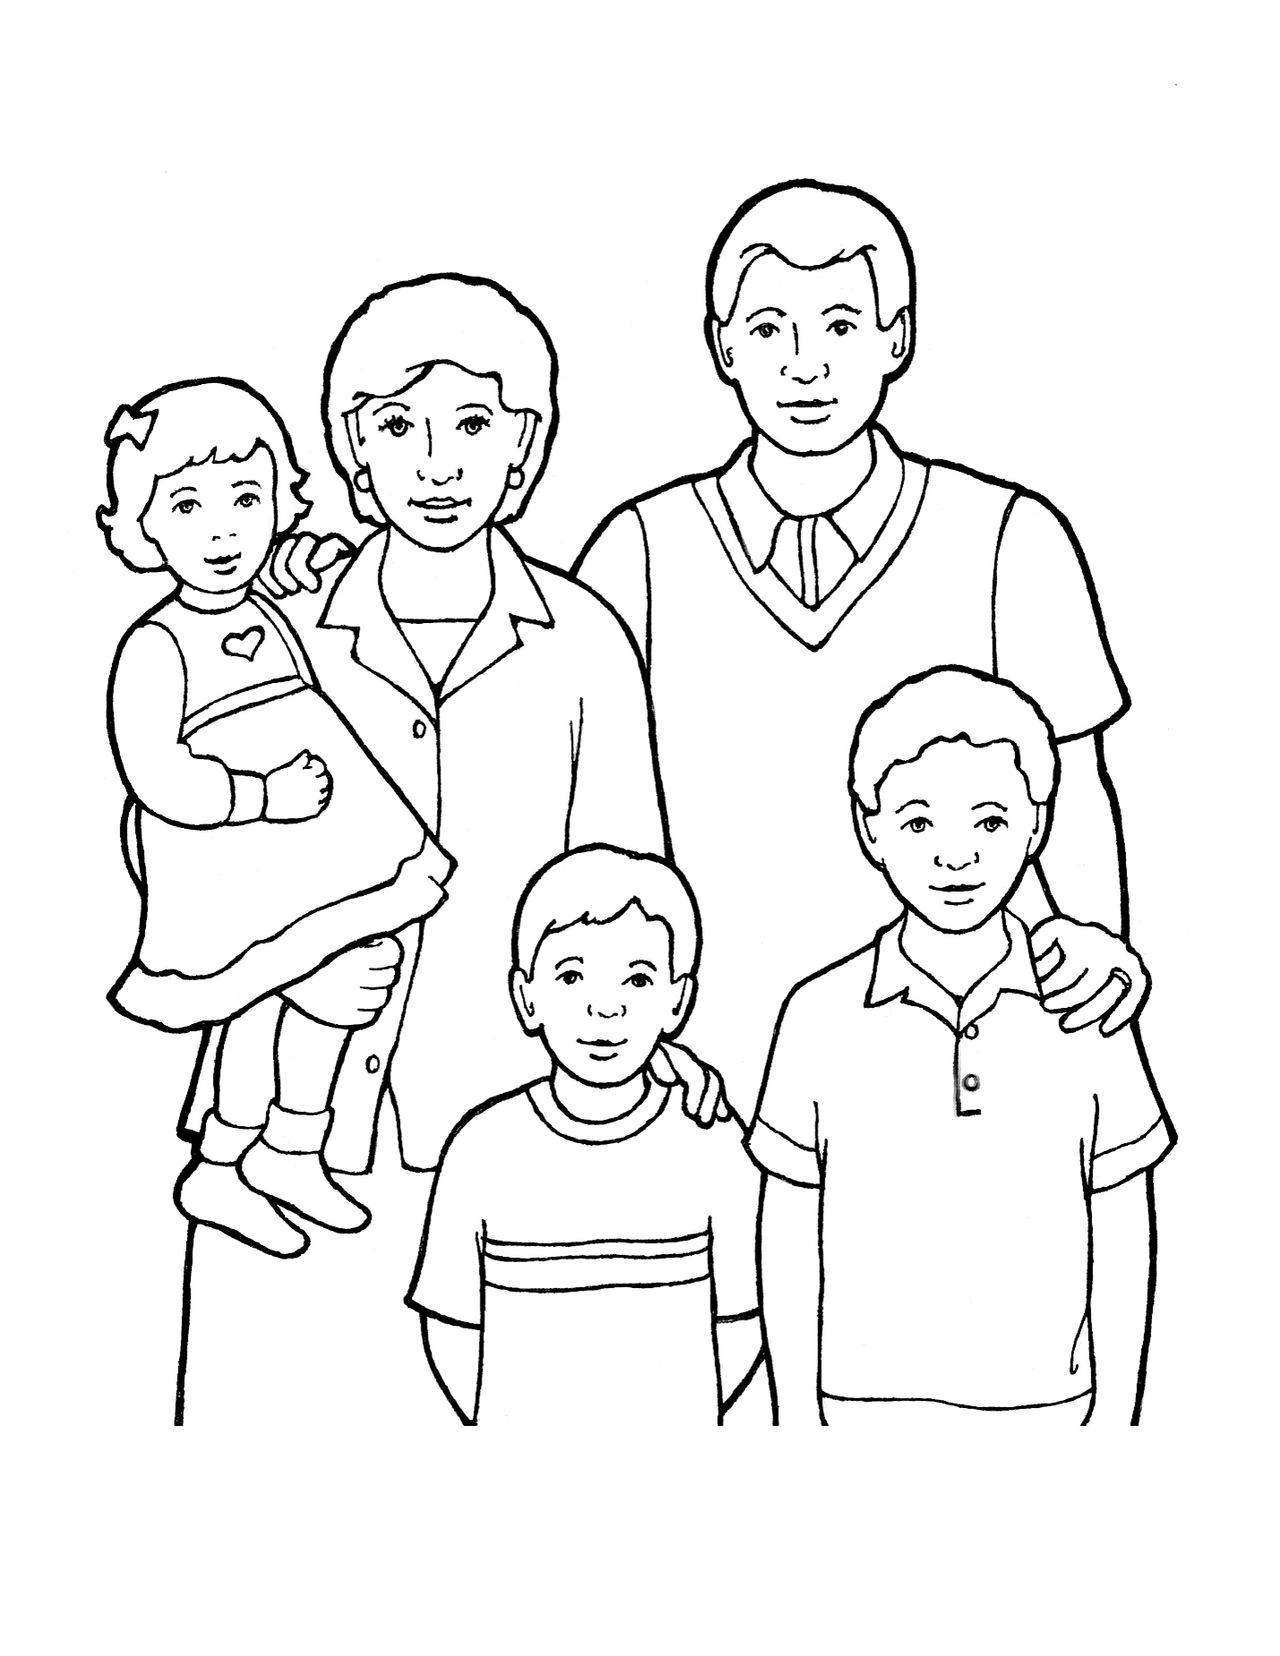 An illustration of a family of five standing side by side.